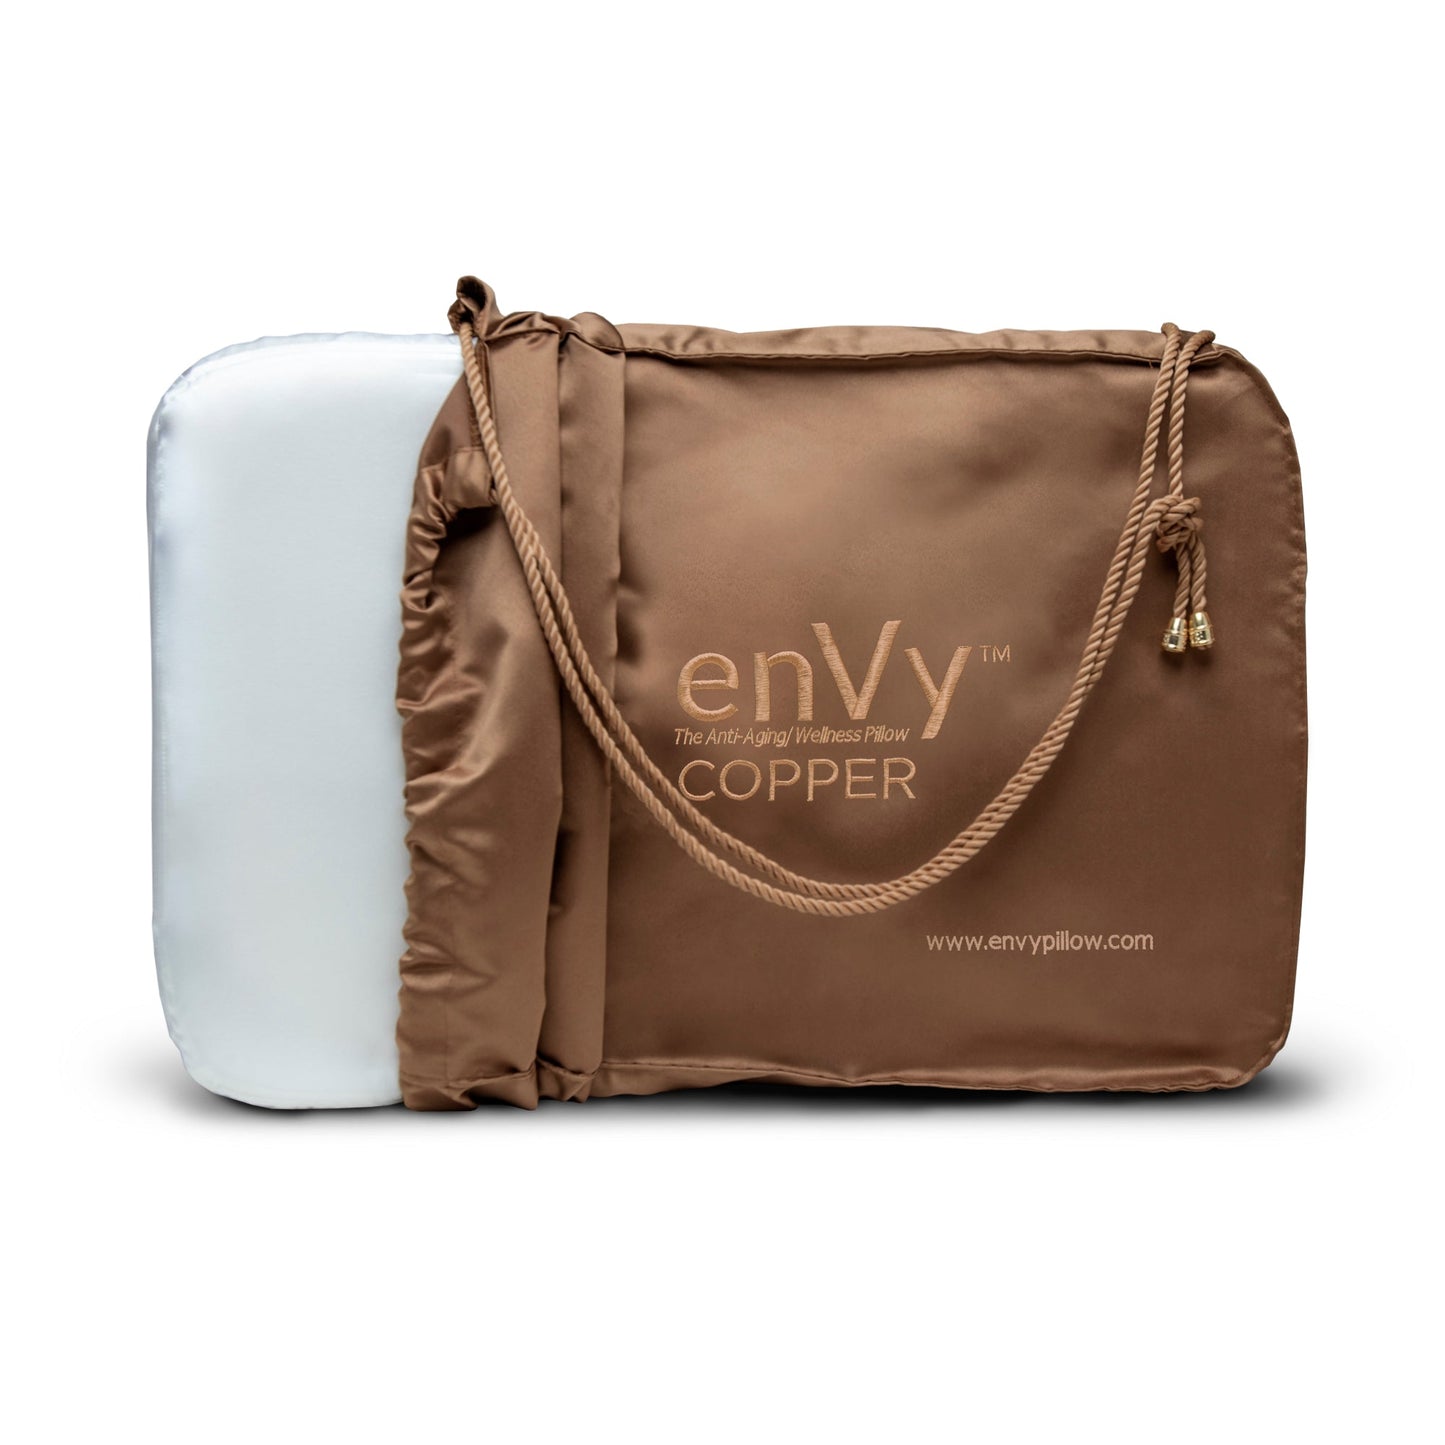 envy™ copper powered natural latex pillow (tencel™ cover)